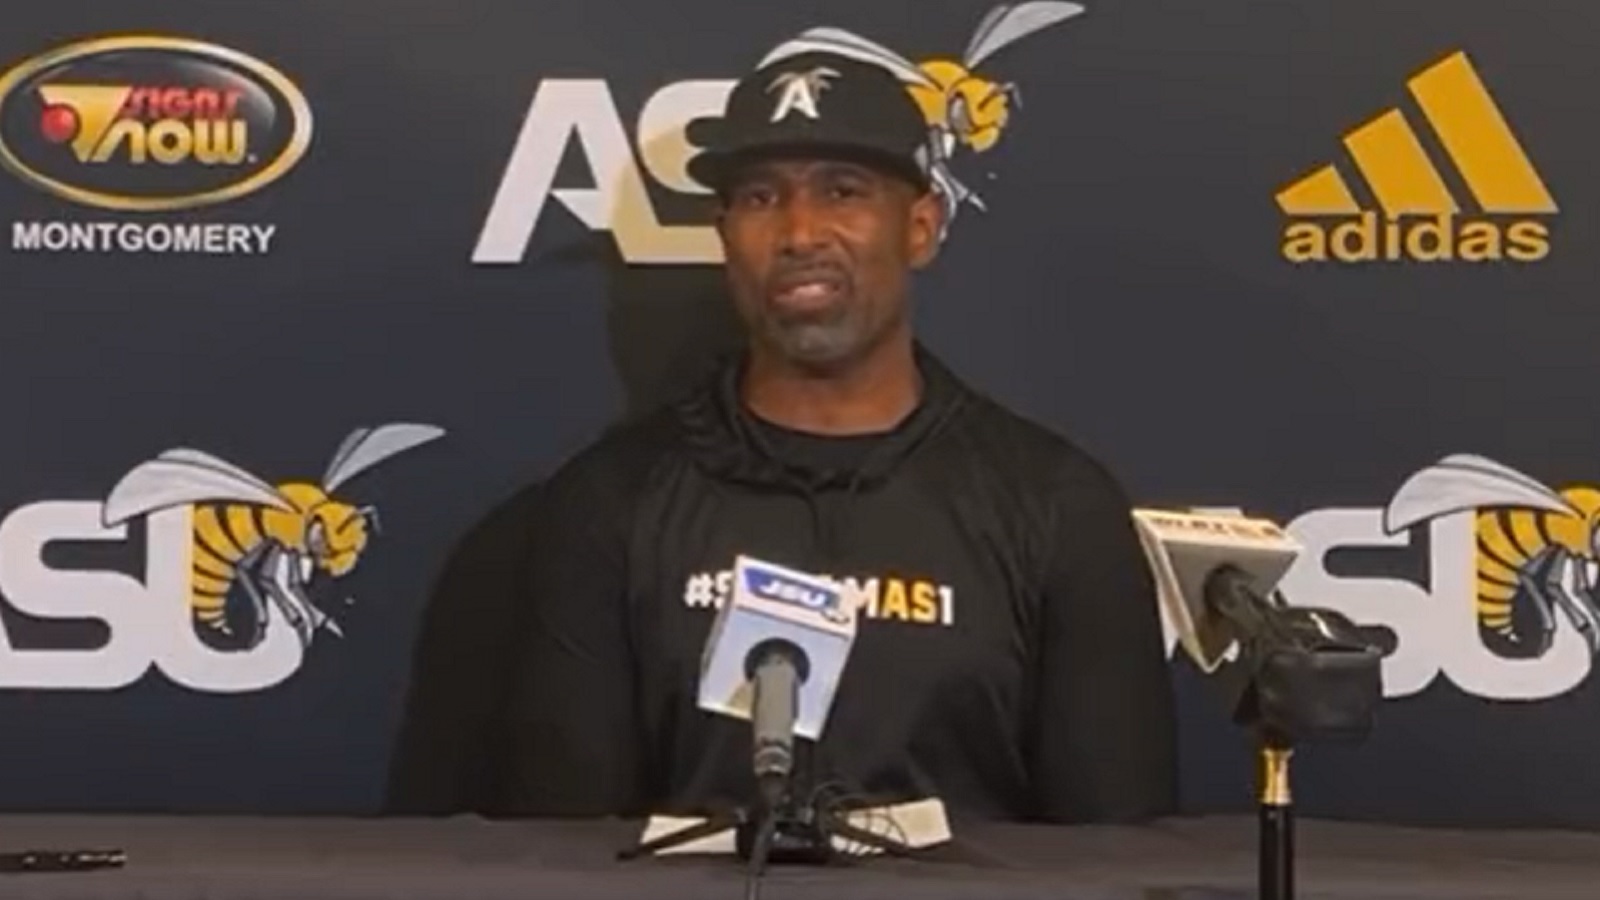 Alabama State coach explains his issue with Deion Sanders